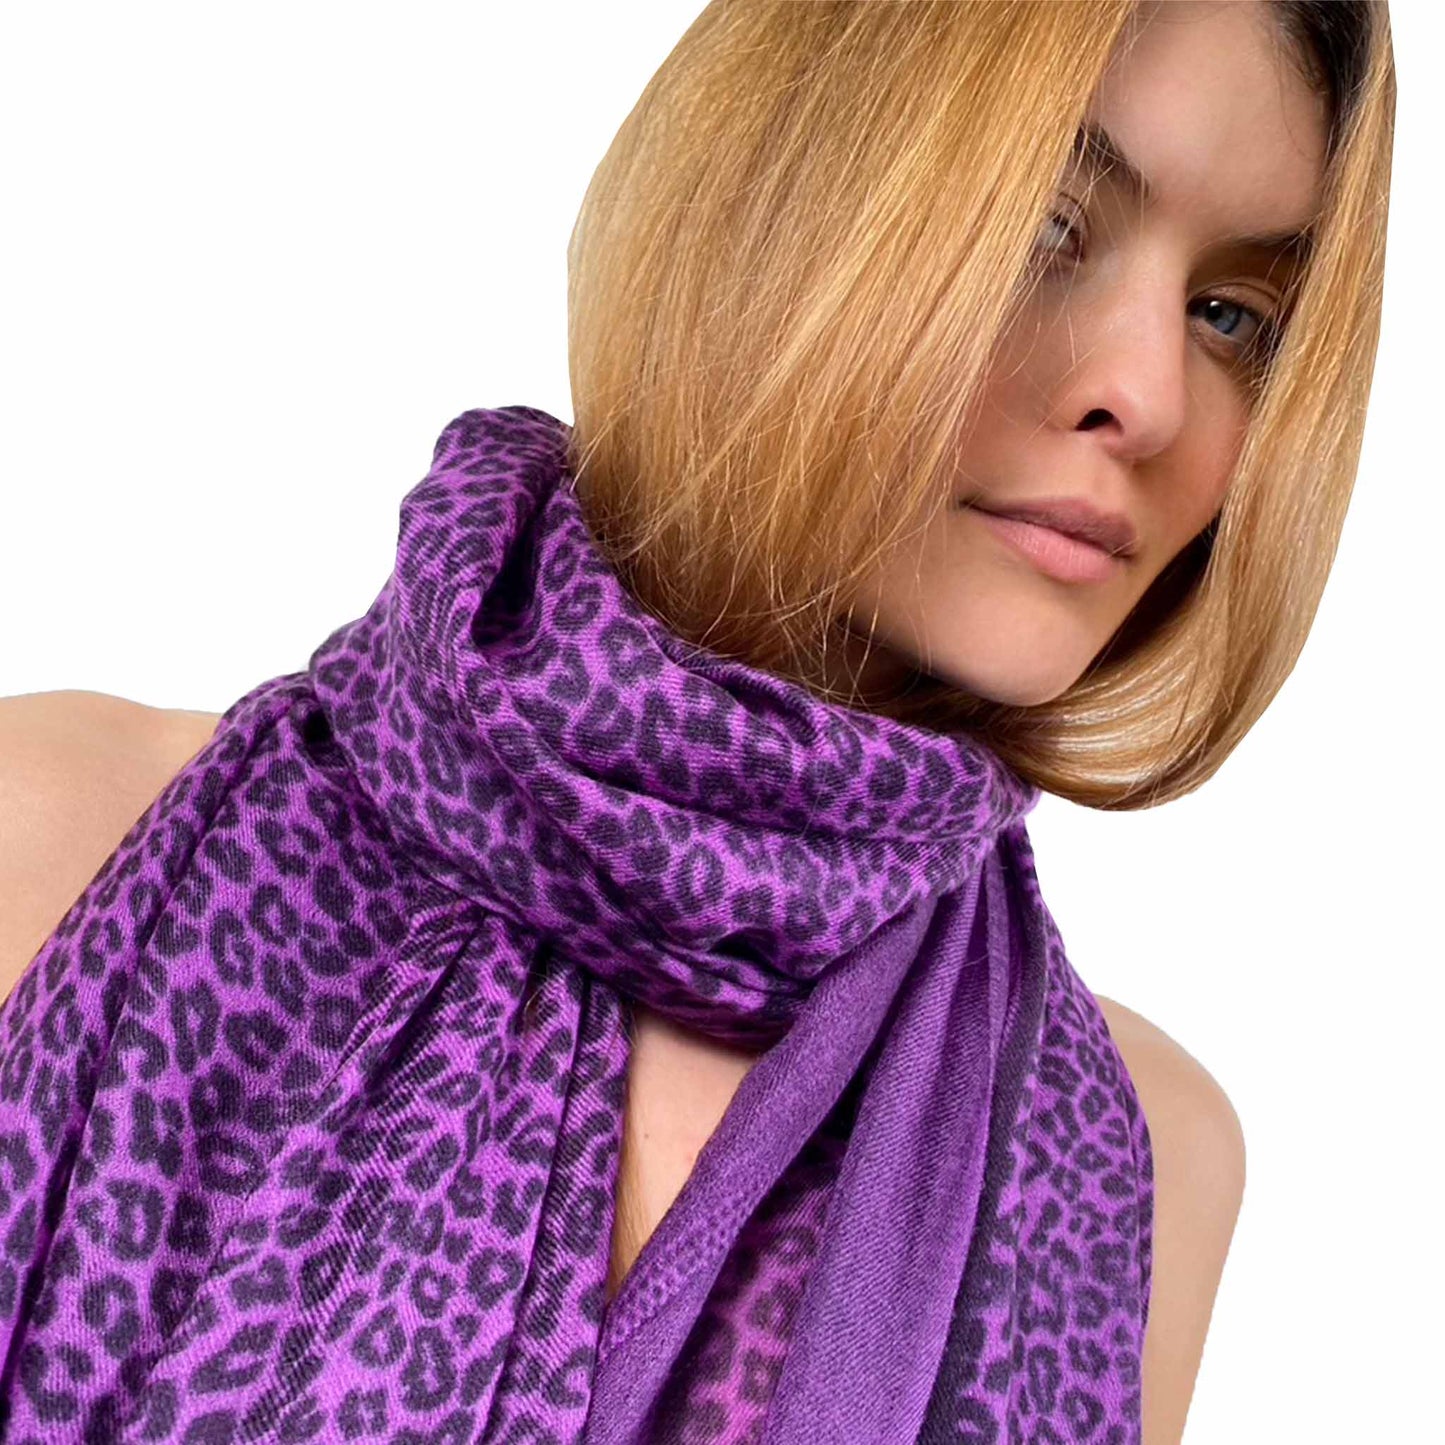 WE LOVE LEO FELTED CASHMERE SCARF